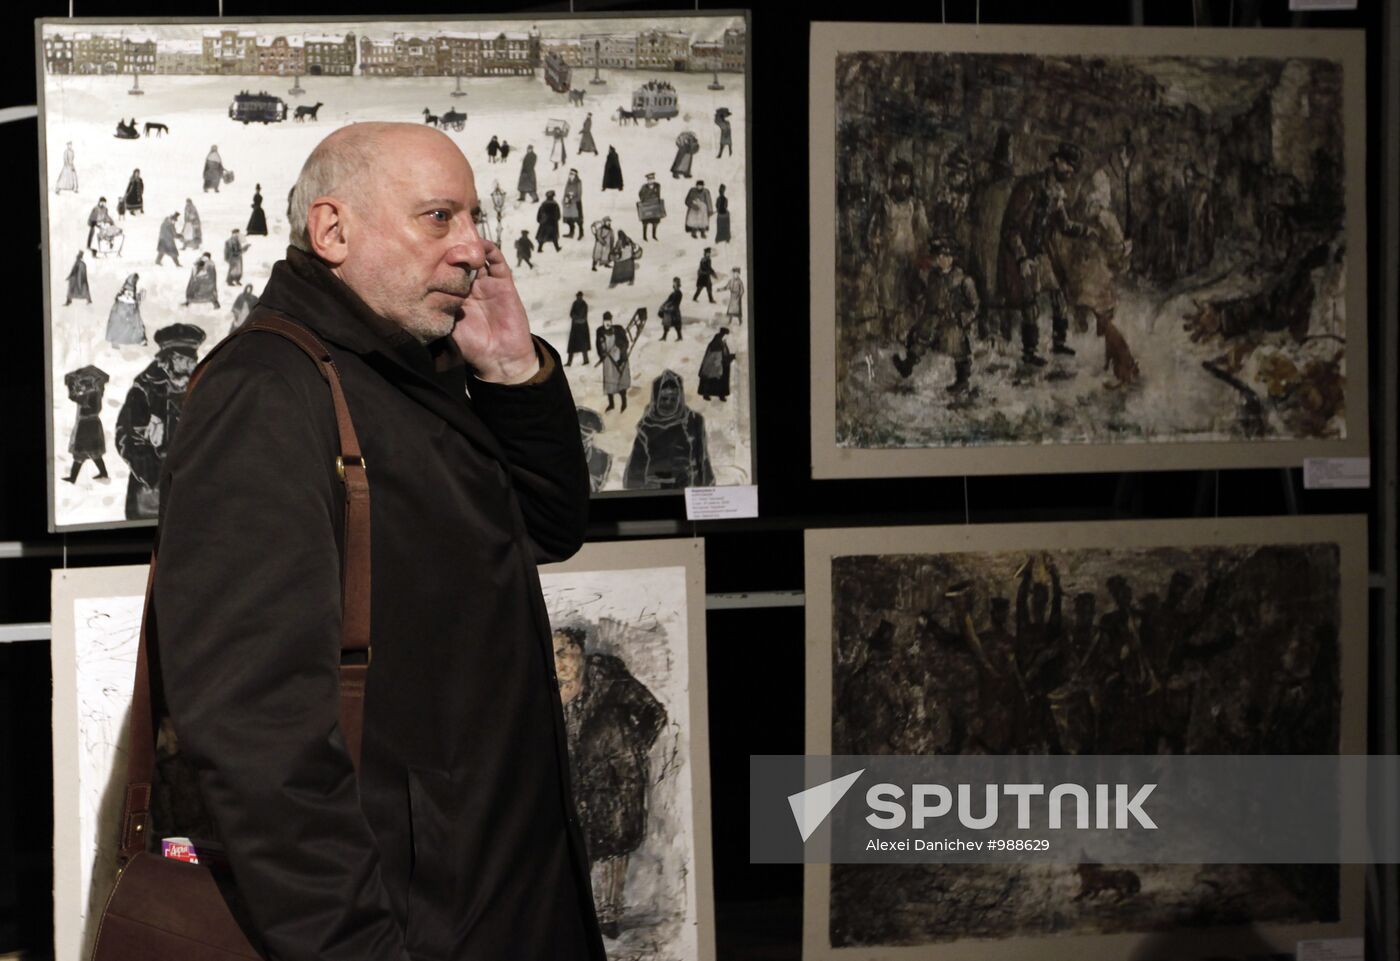 "Process of Filmmaking" exhibition opened at Lenfilm Studios